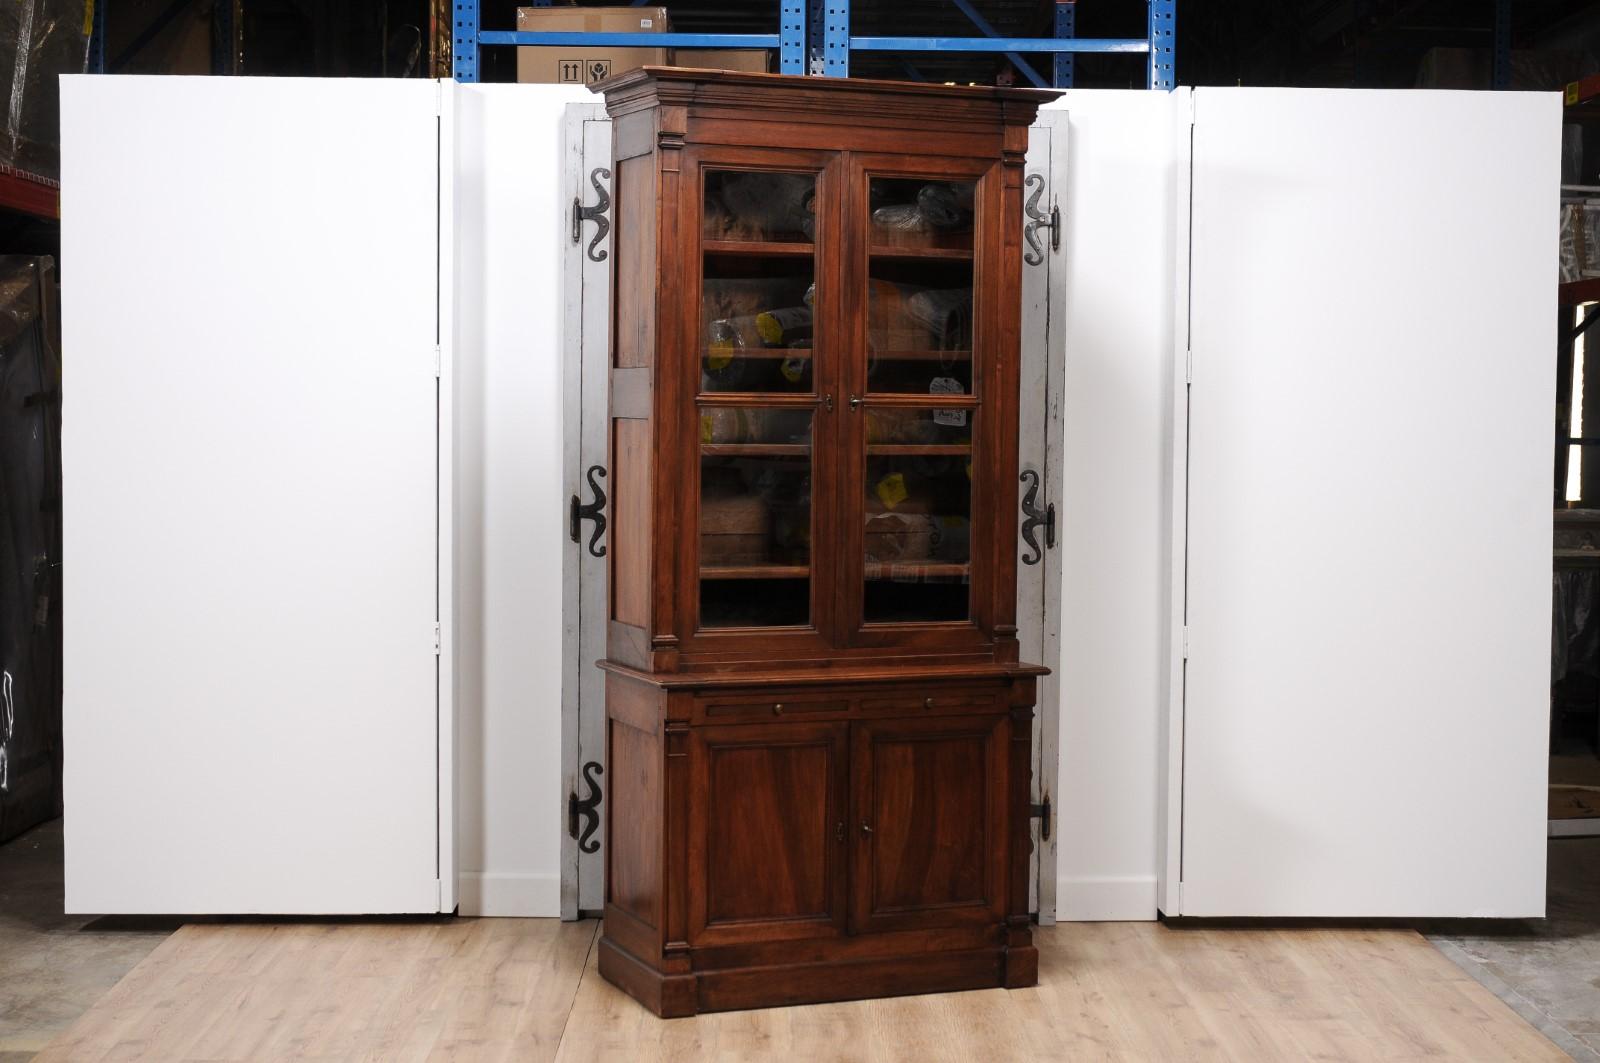 A French Louis XVI style two-part walnut bookcase from circa 1890 with glass doors in the upper section flanked with slender Doric style pilasters, pull-out drawers and wooden doors at the bottom.  Introduce a touch of classic French elegance to